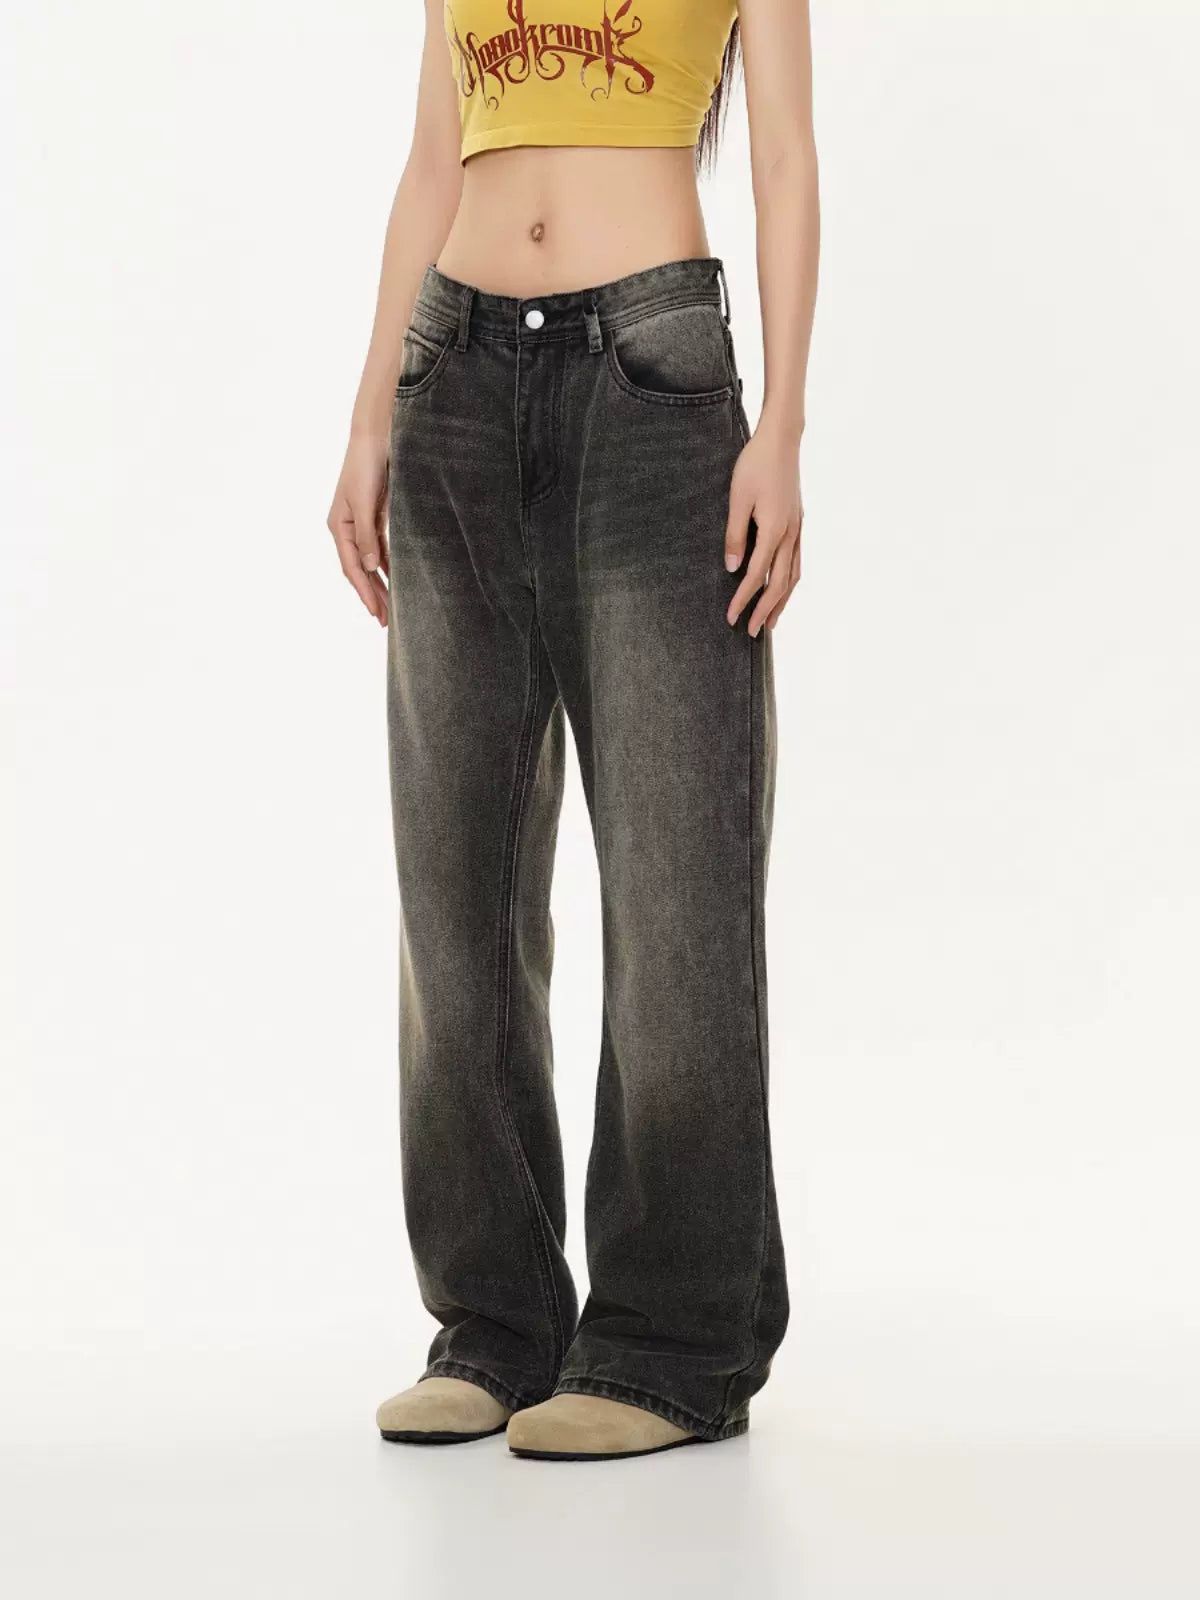 Workwear Washed Faded Jeans Korean Street Fashion Jeans By Made Extreme Shop Online at OH Vault